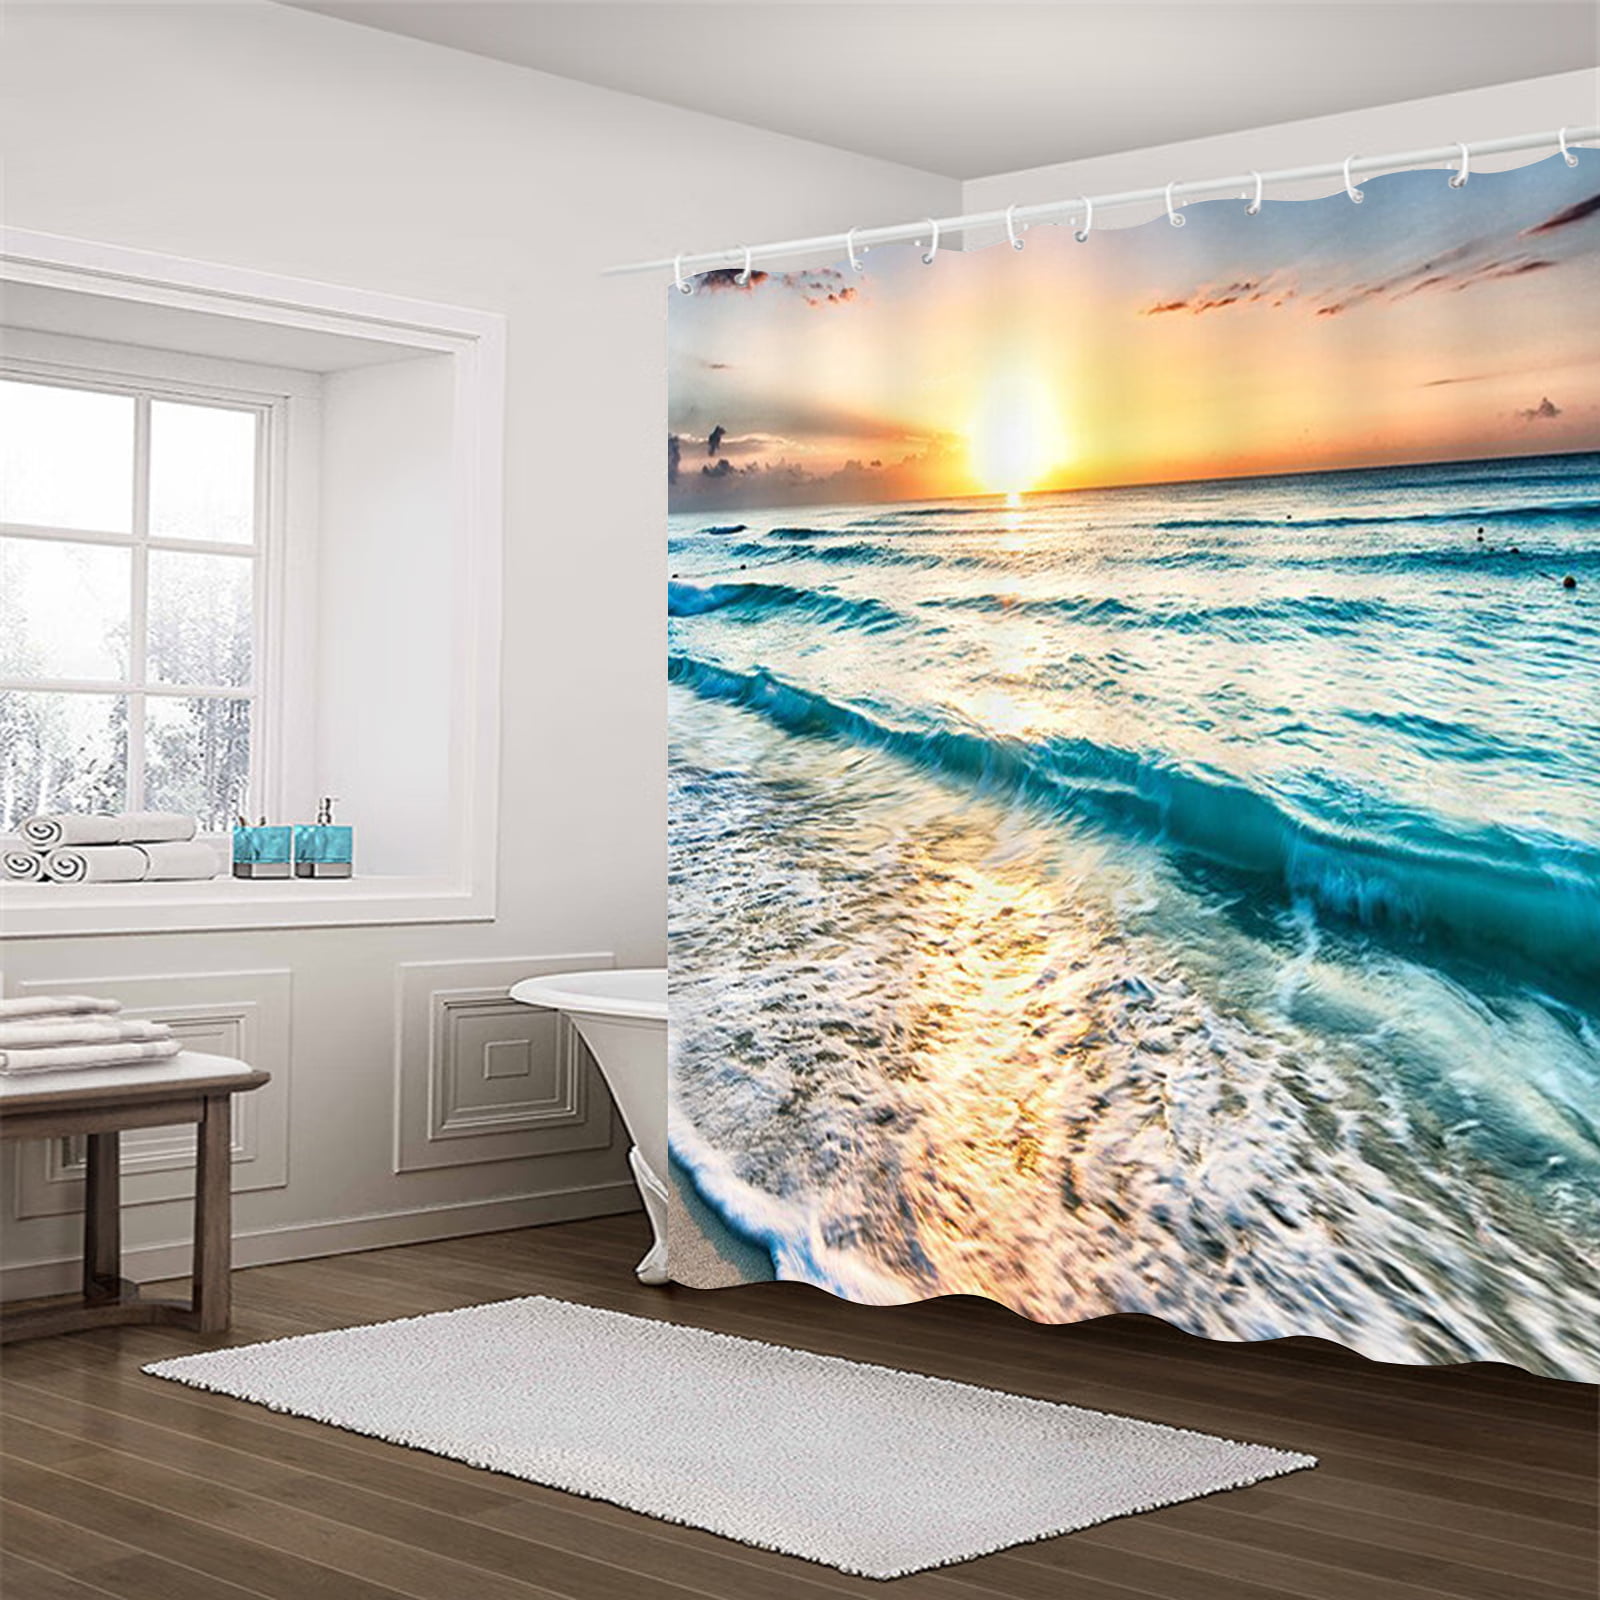  Shower Curtain Welcome Summer Sun Rises Above Sea Level Shower  Curtains Waterproof Polyester Fabric Bath Curtains with Hooks for Farmhouse Bathroom  Decor 54 Wx78 L : Home & Kitchen